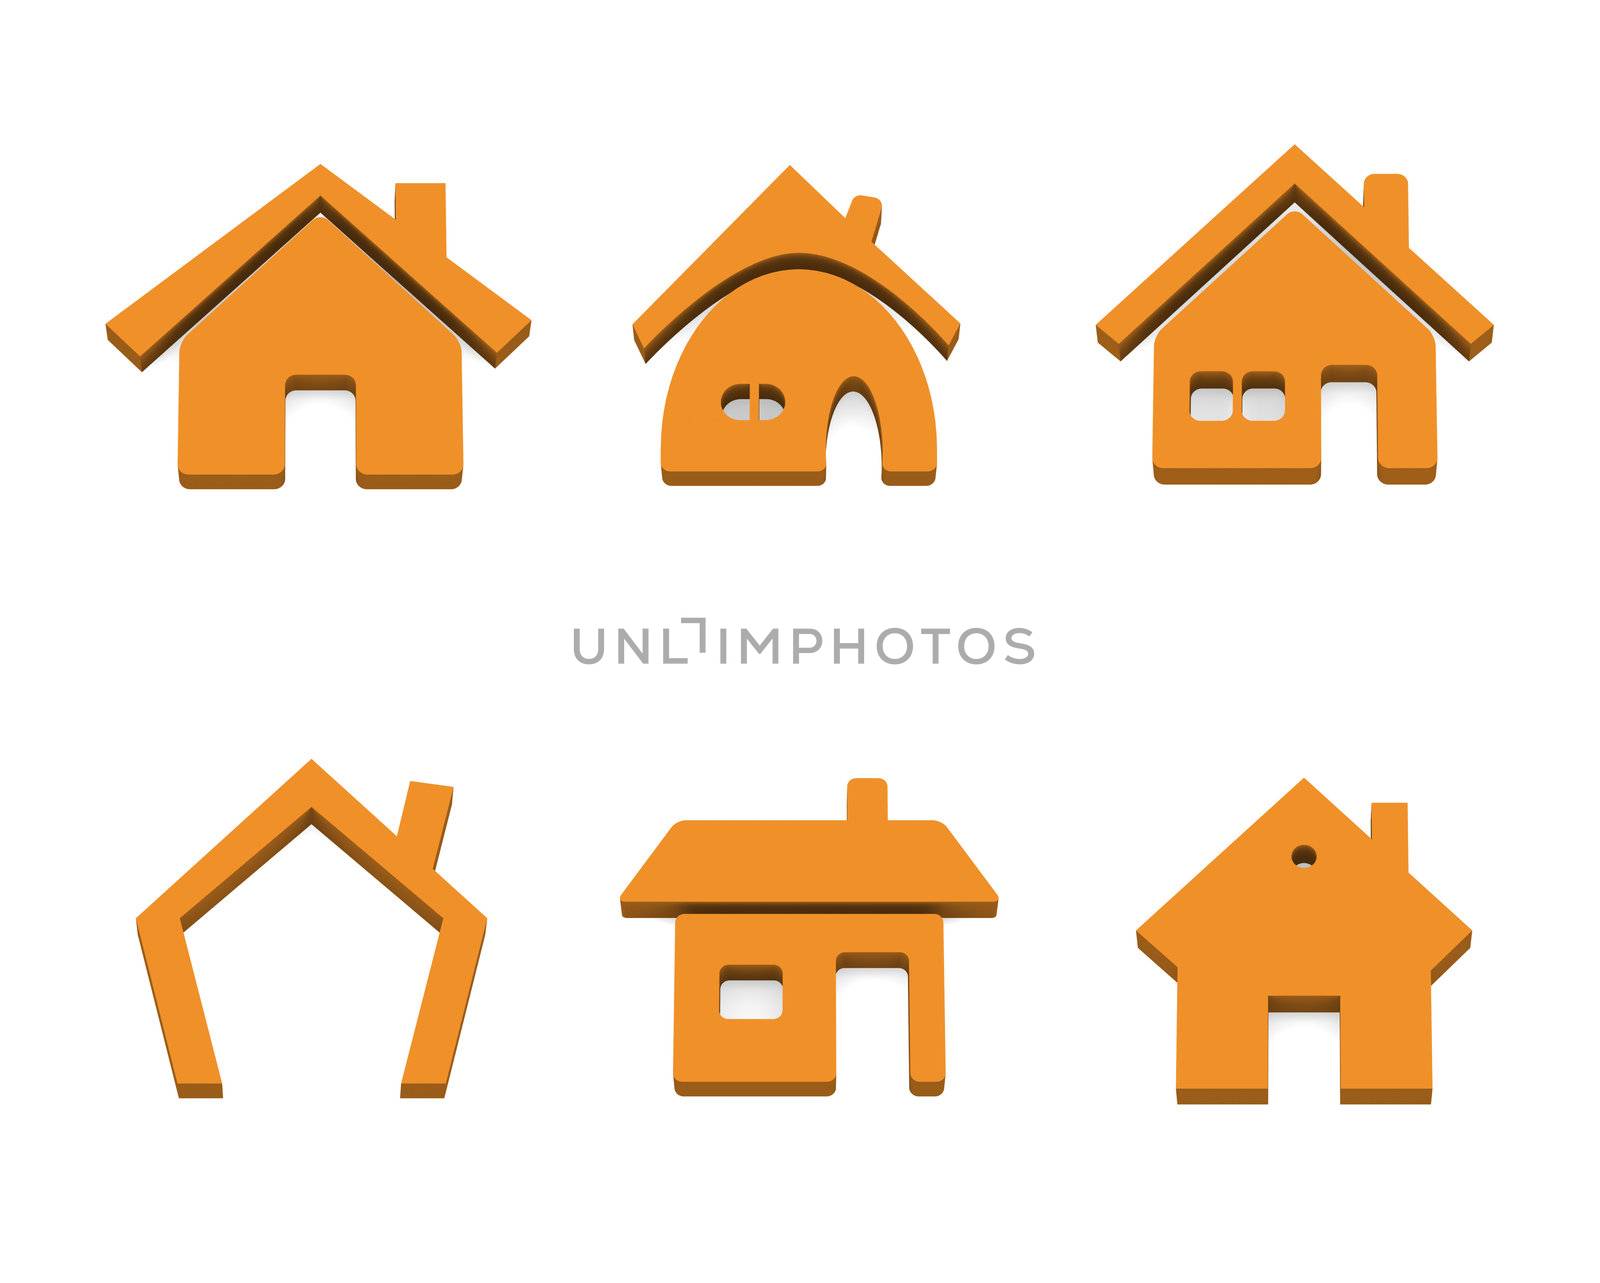 Set of 6 house 3d rendered icon variations